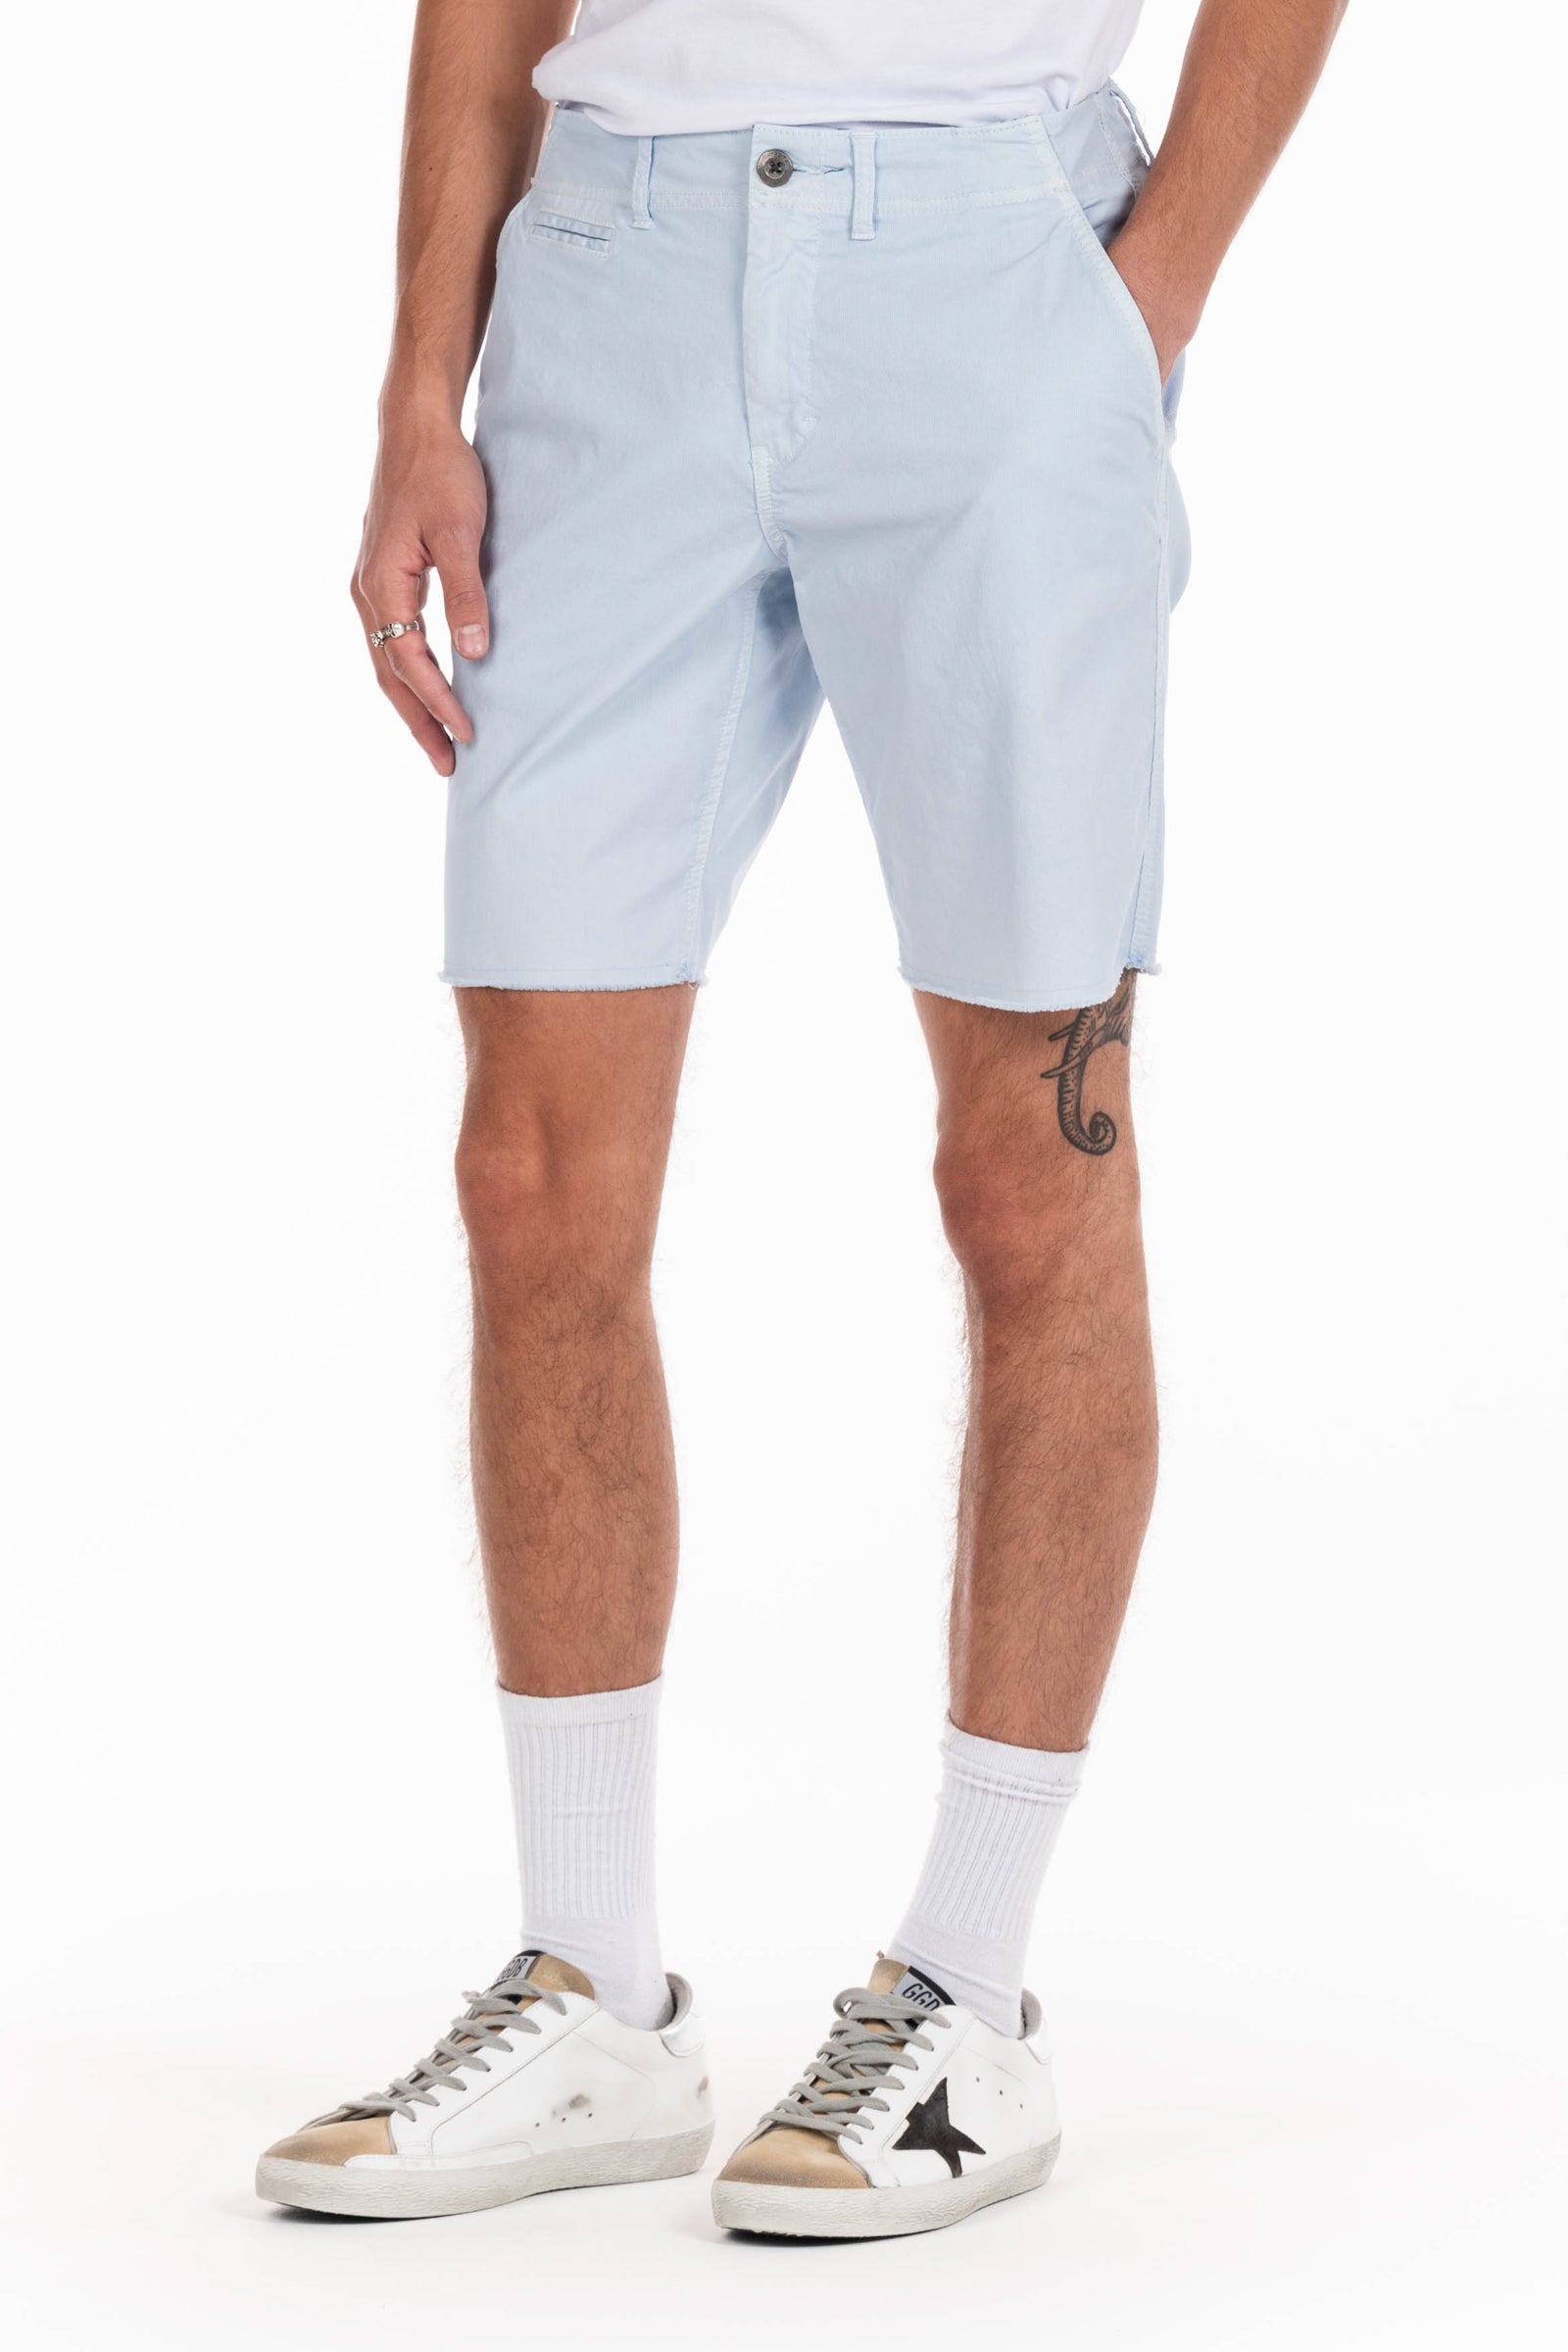 Original Paperbacks Brentwood Chino Short in Waterfall on Model Cropped Styled View